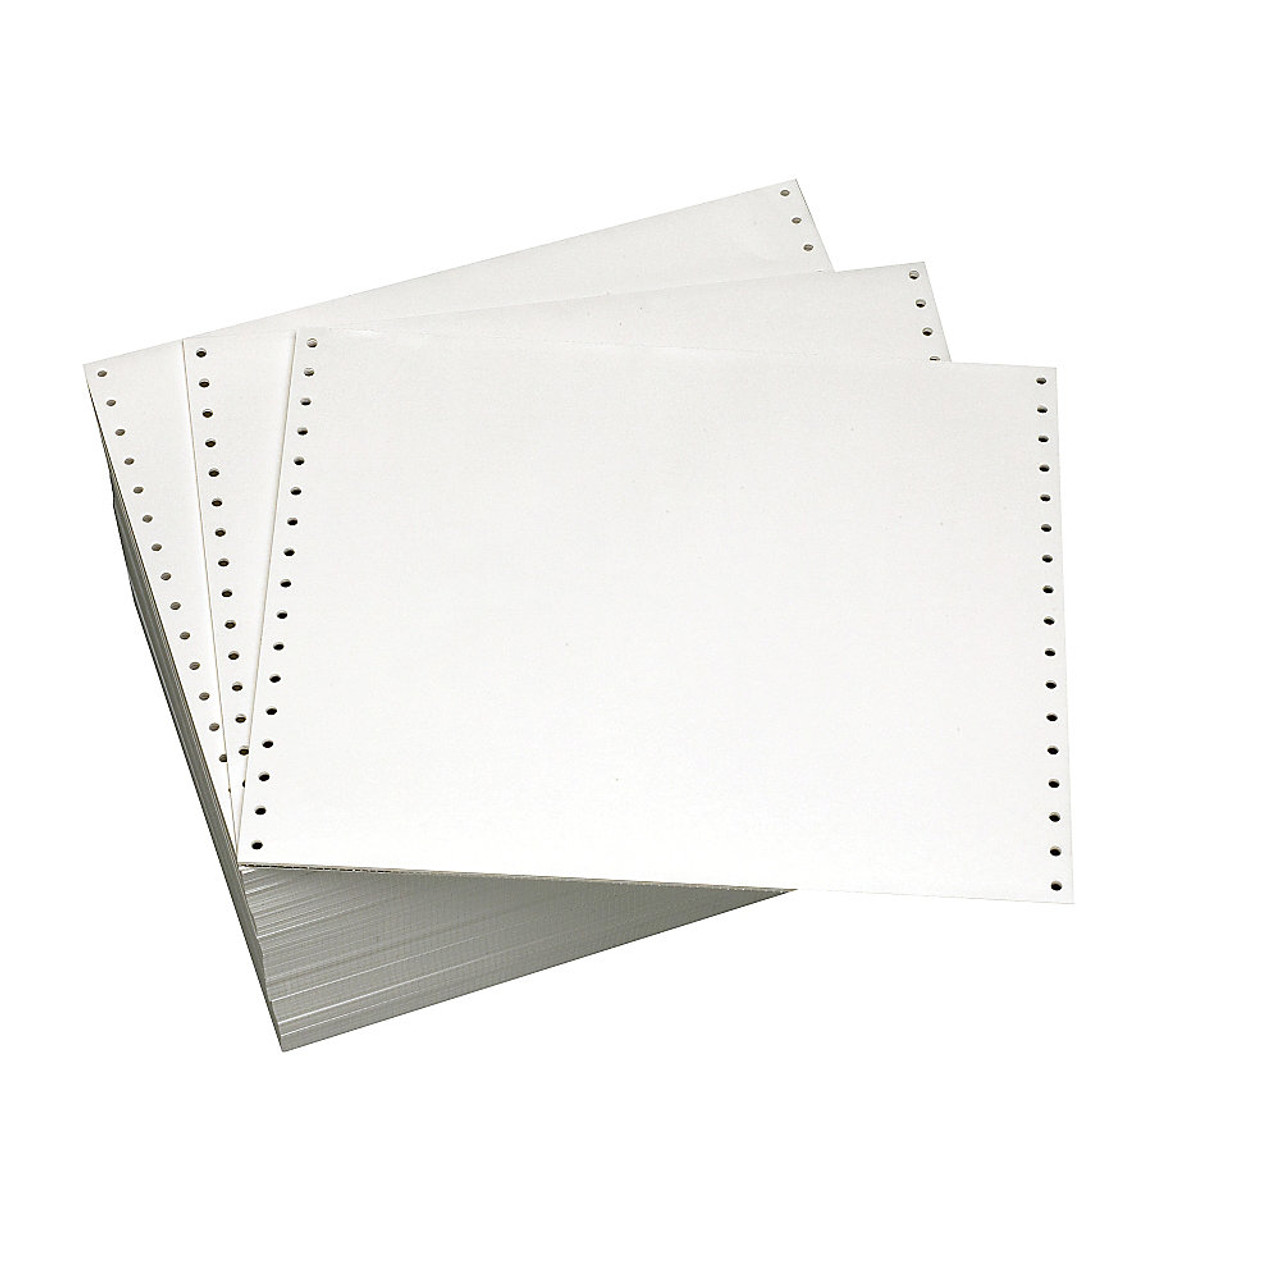 14 7/8 X 11 15# Blank Continuous Computer Paper, 3500 sheets, 9101